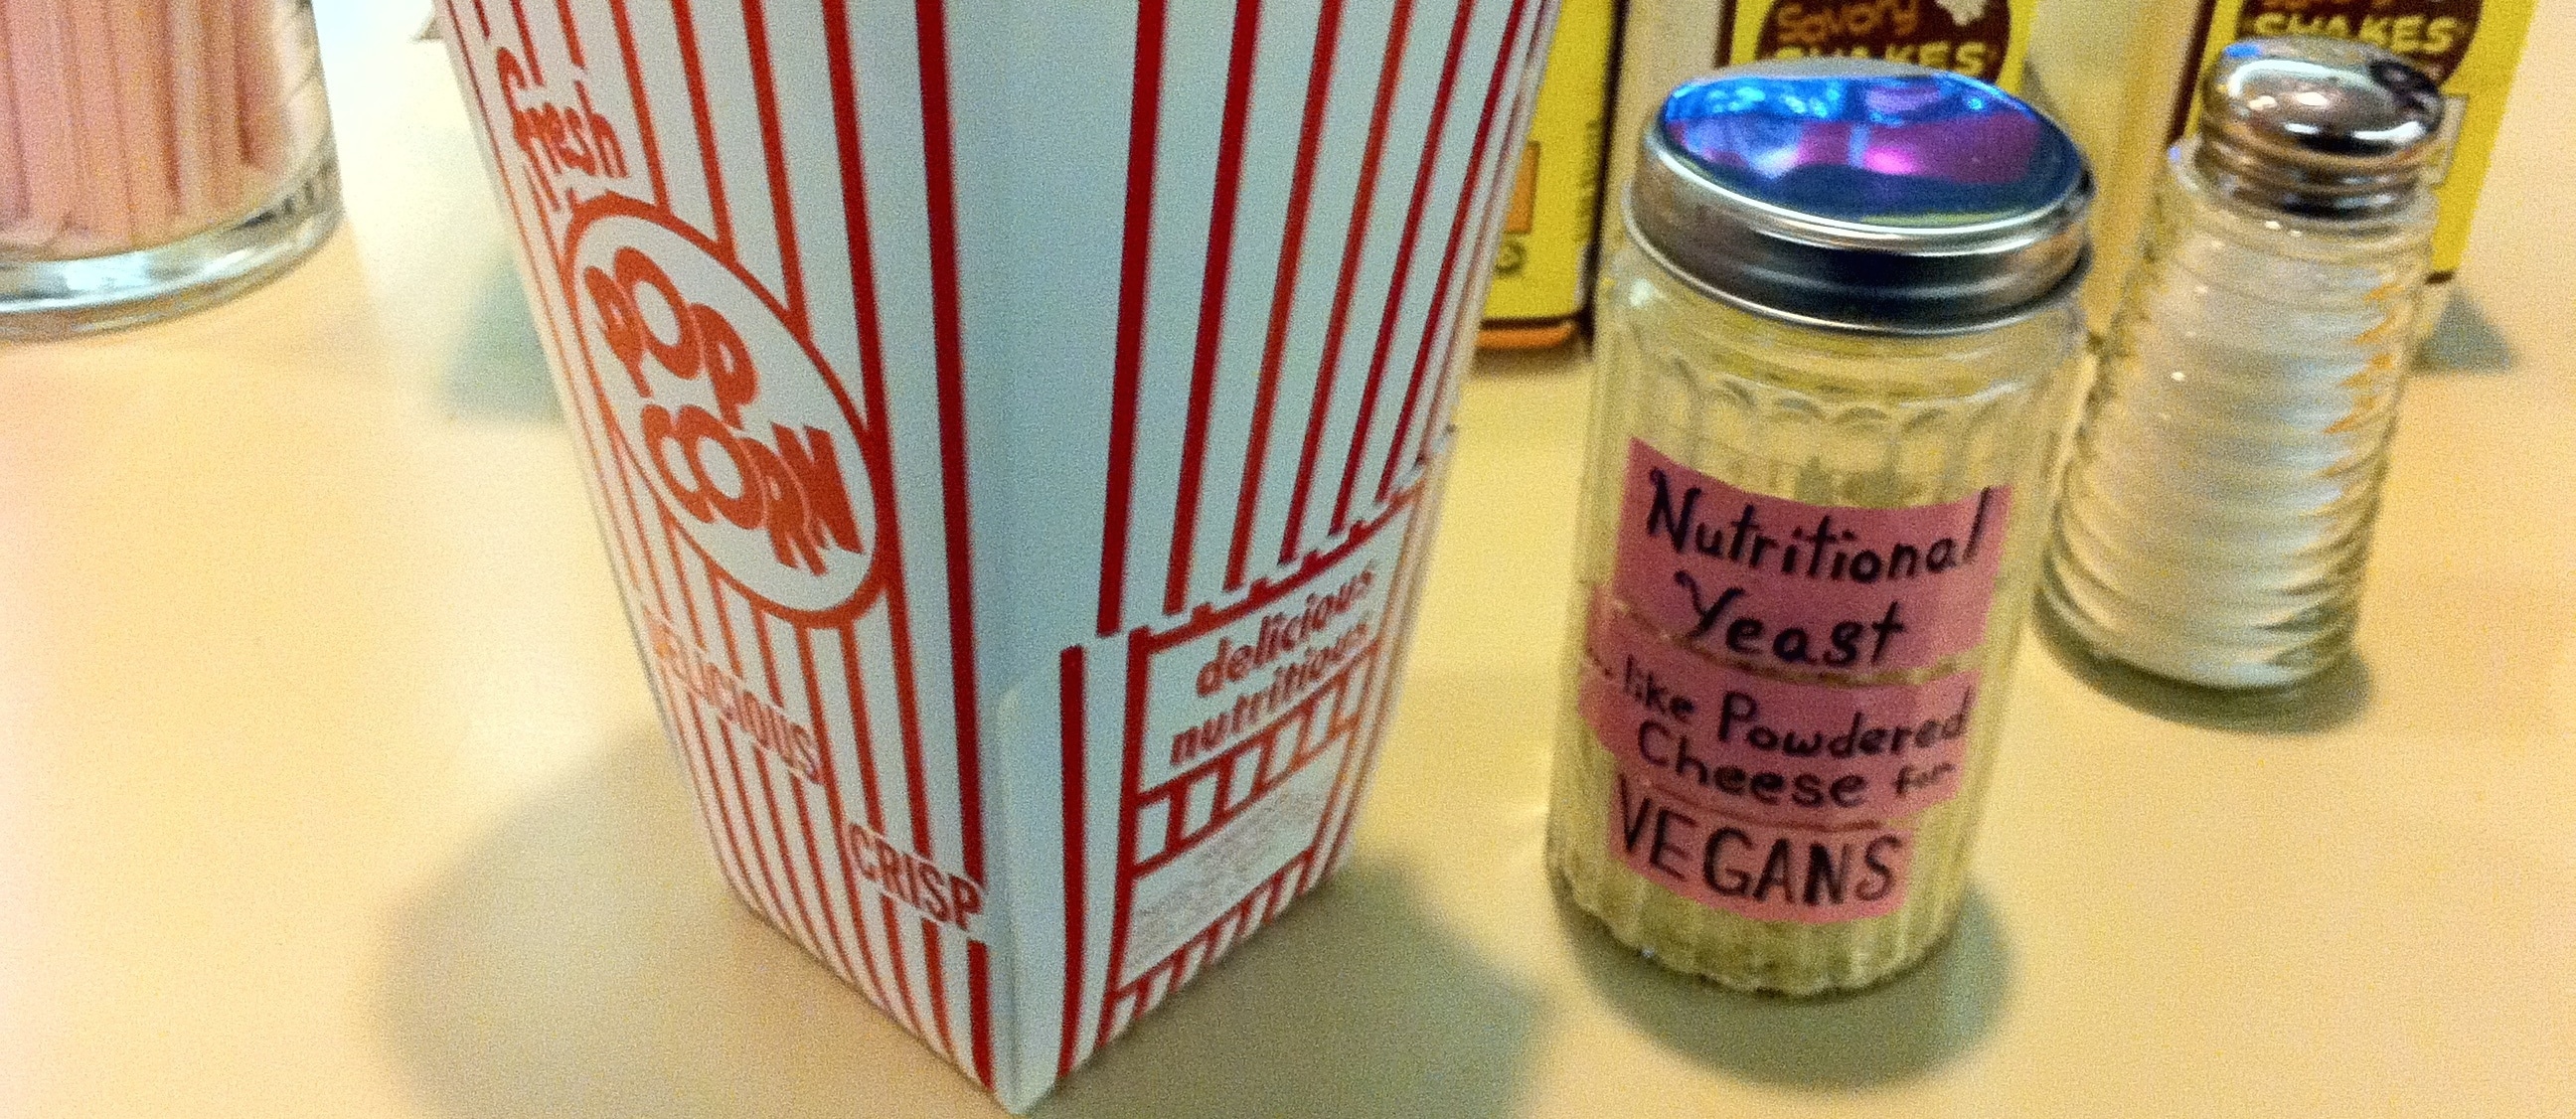 Why Athletes Should Eat More Nutritional Yeast